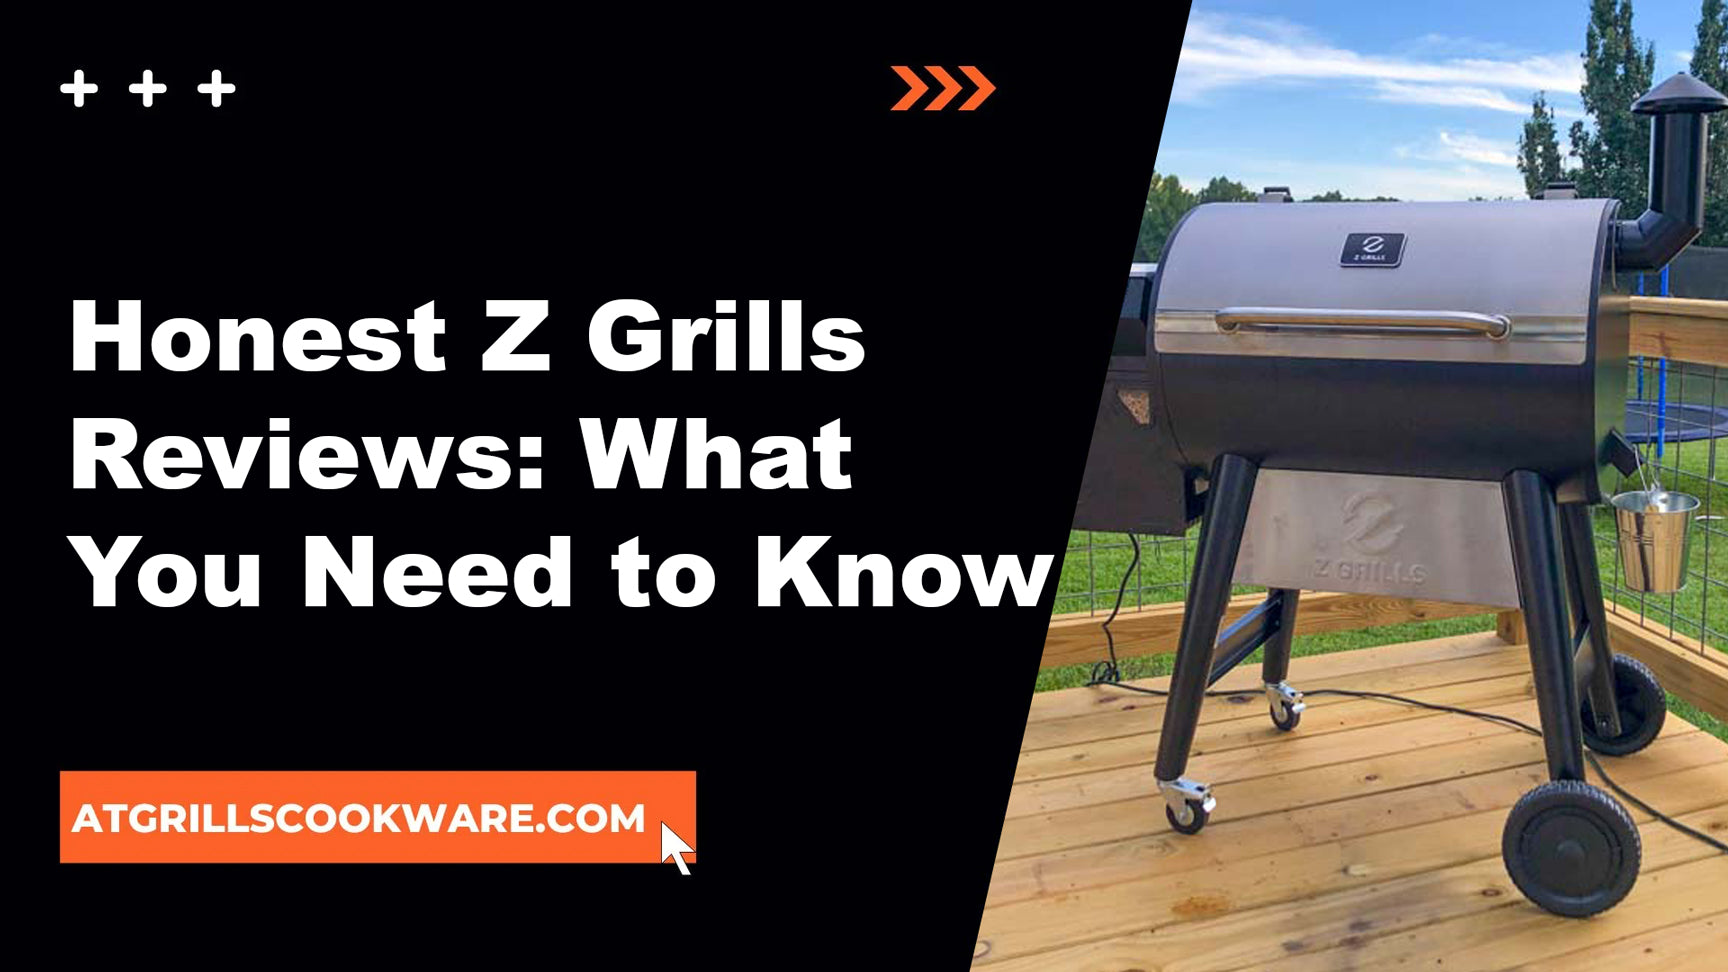 Honest Z Grills Reviews: What You Need to Know